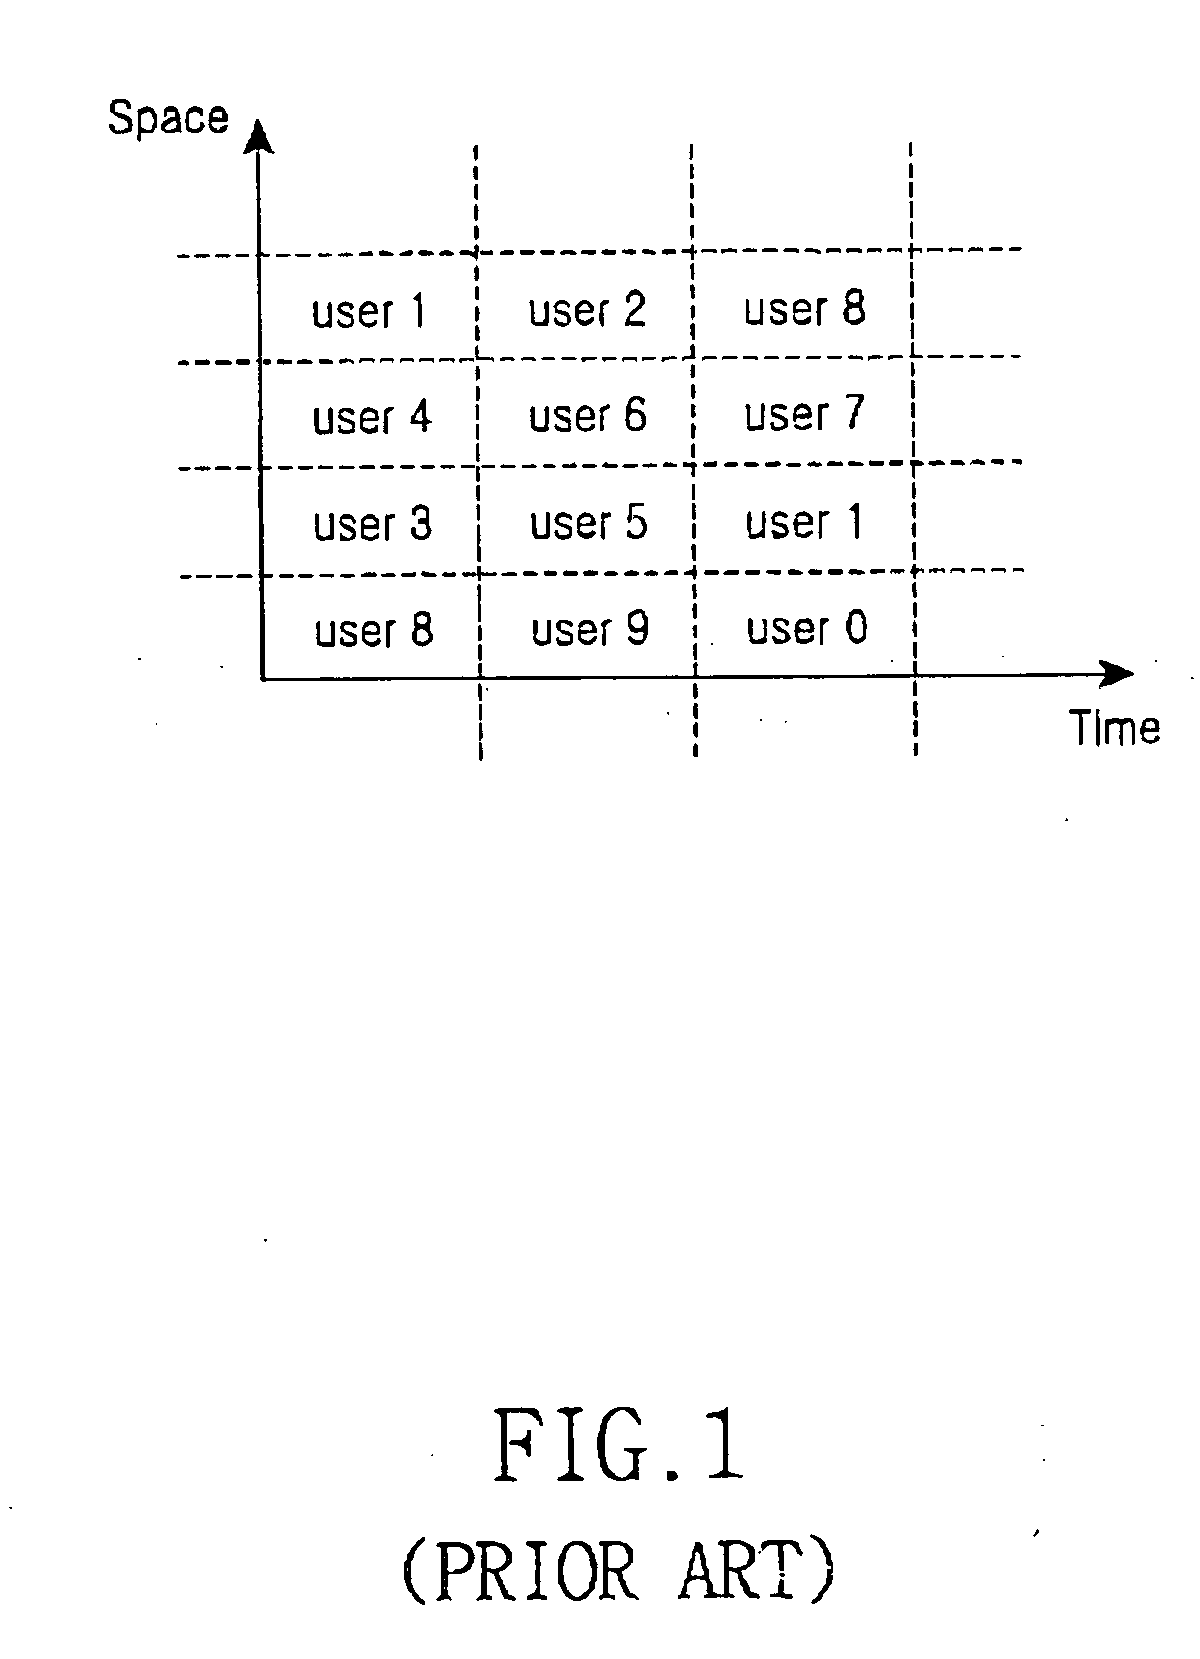 Method and apparatus for scheduling multiple users in a mobile communication system using multiple transmit/receive antennas